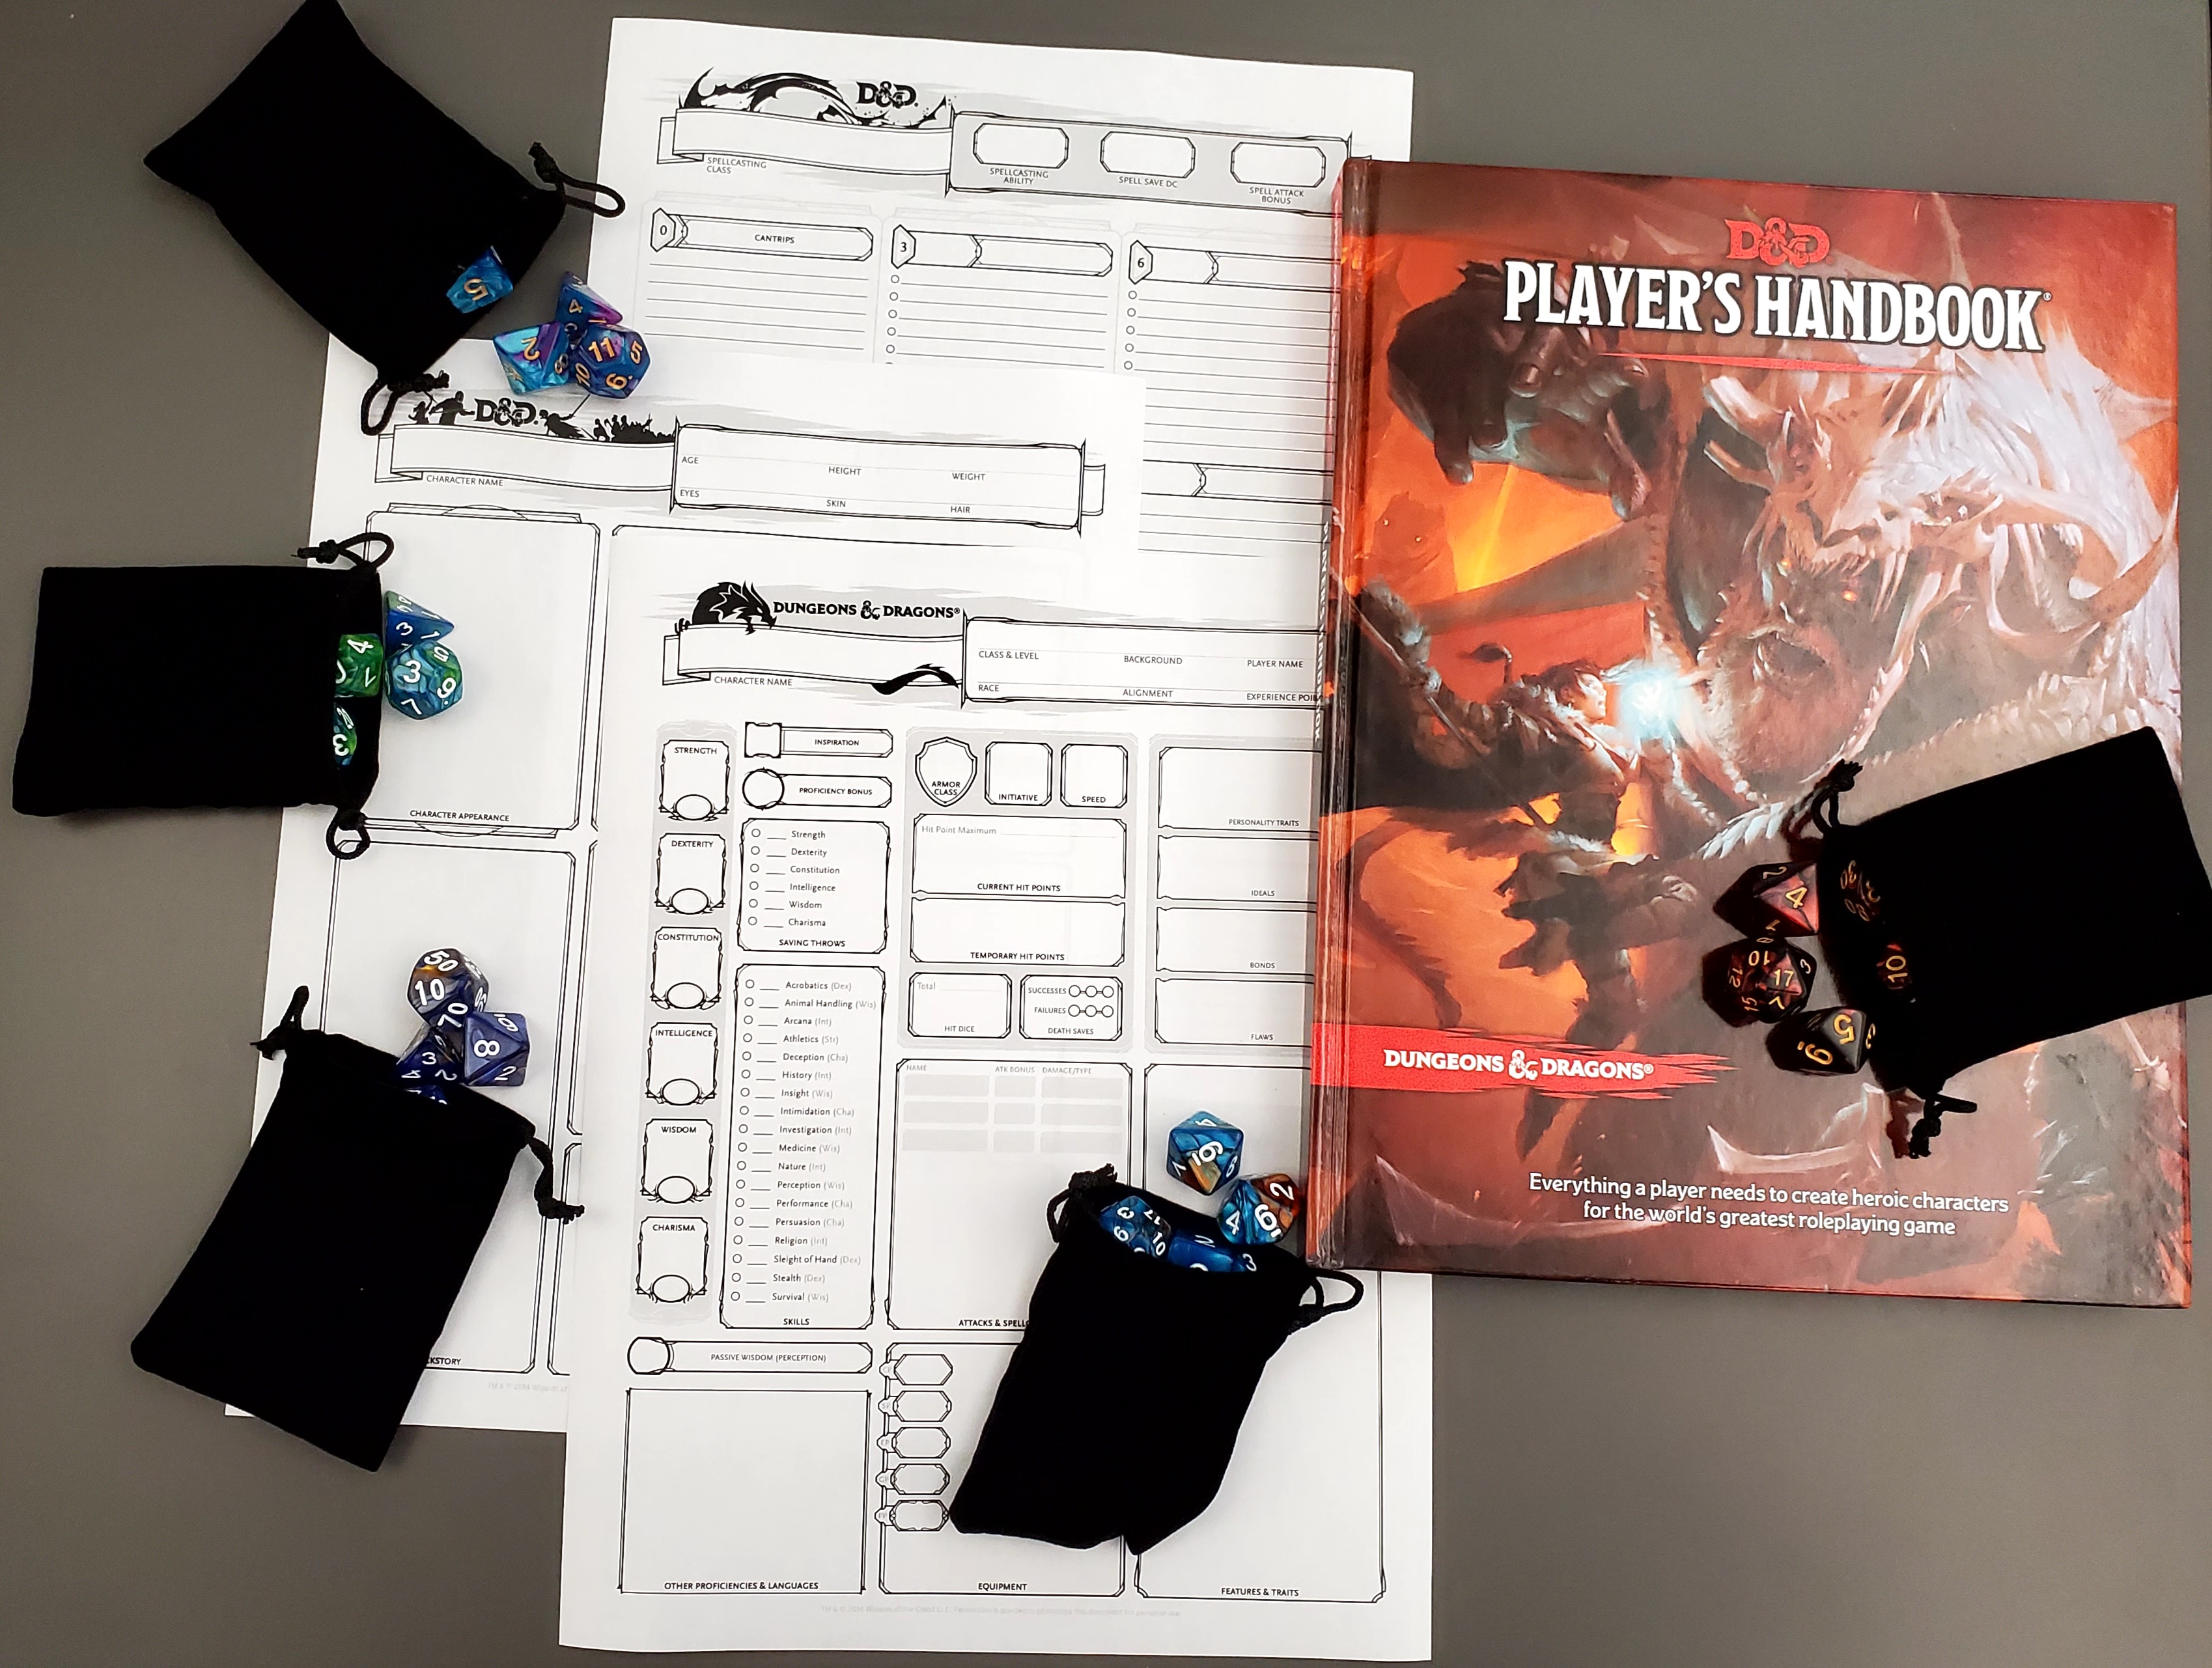 To the right: Dungeons and Dragons Players Handbook, a black bag of dice on top of the book, to the left there are 3 blank characters sheets and 4 black bags with colorful Dungeons and Dragons dice spilling out